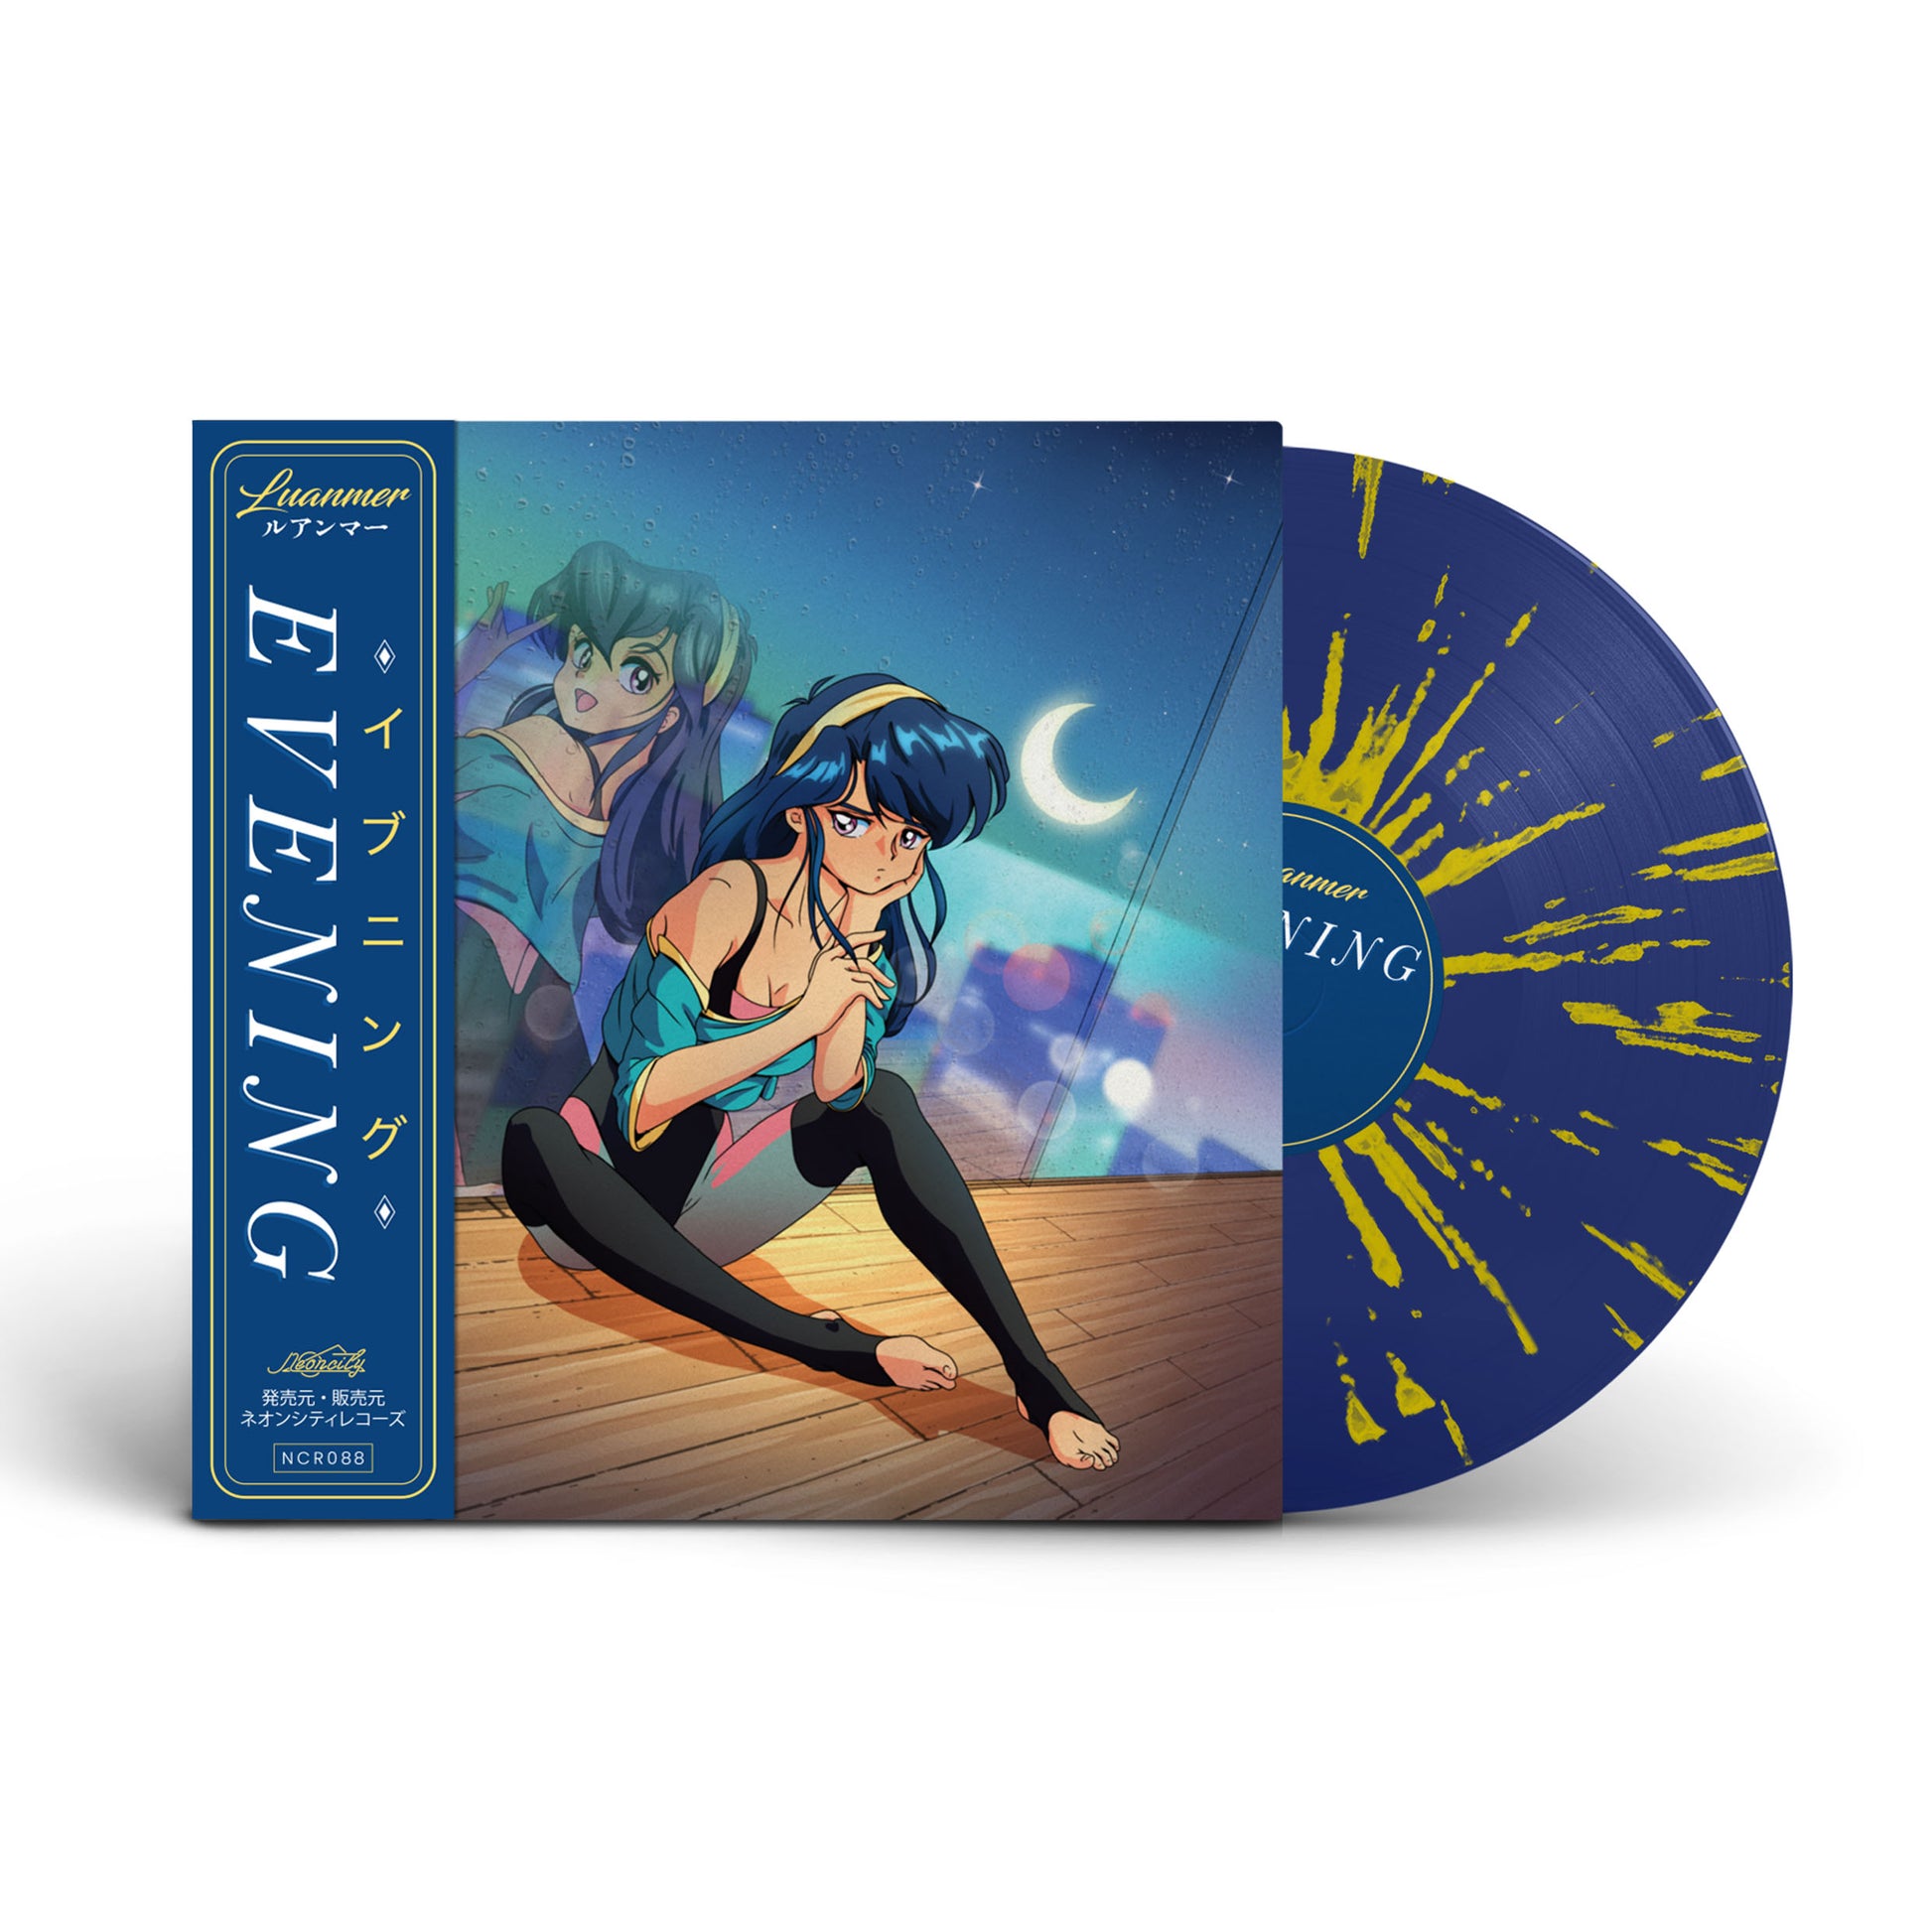 ROME 12 Vinyl Hegemonikon – A Journey to the End of Light clear/tr,  49,90 €